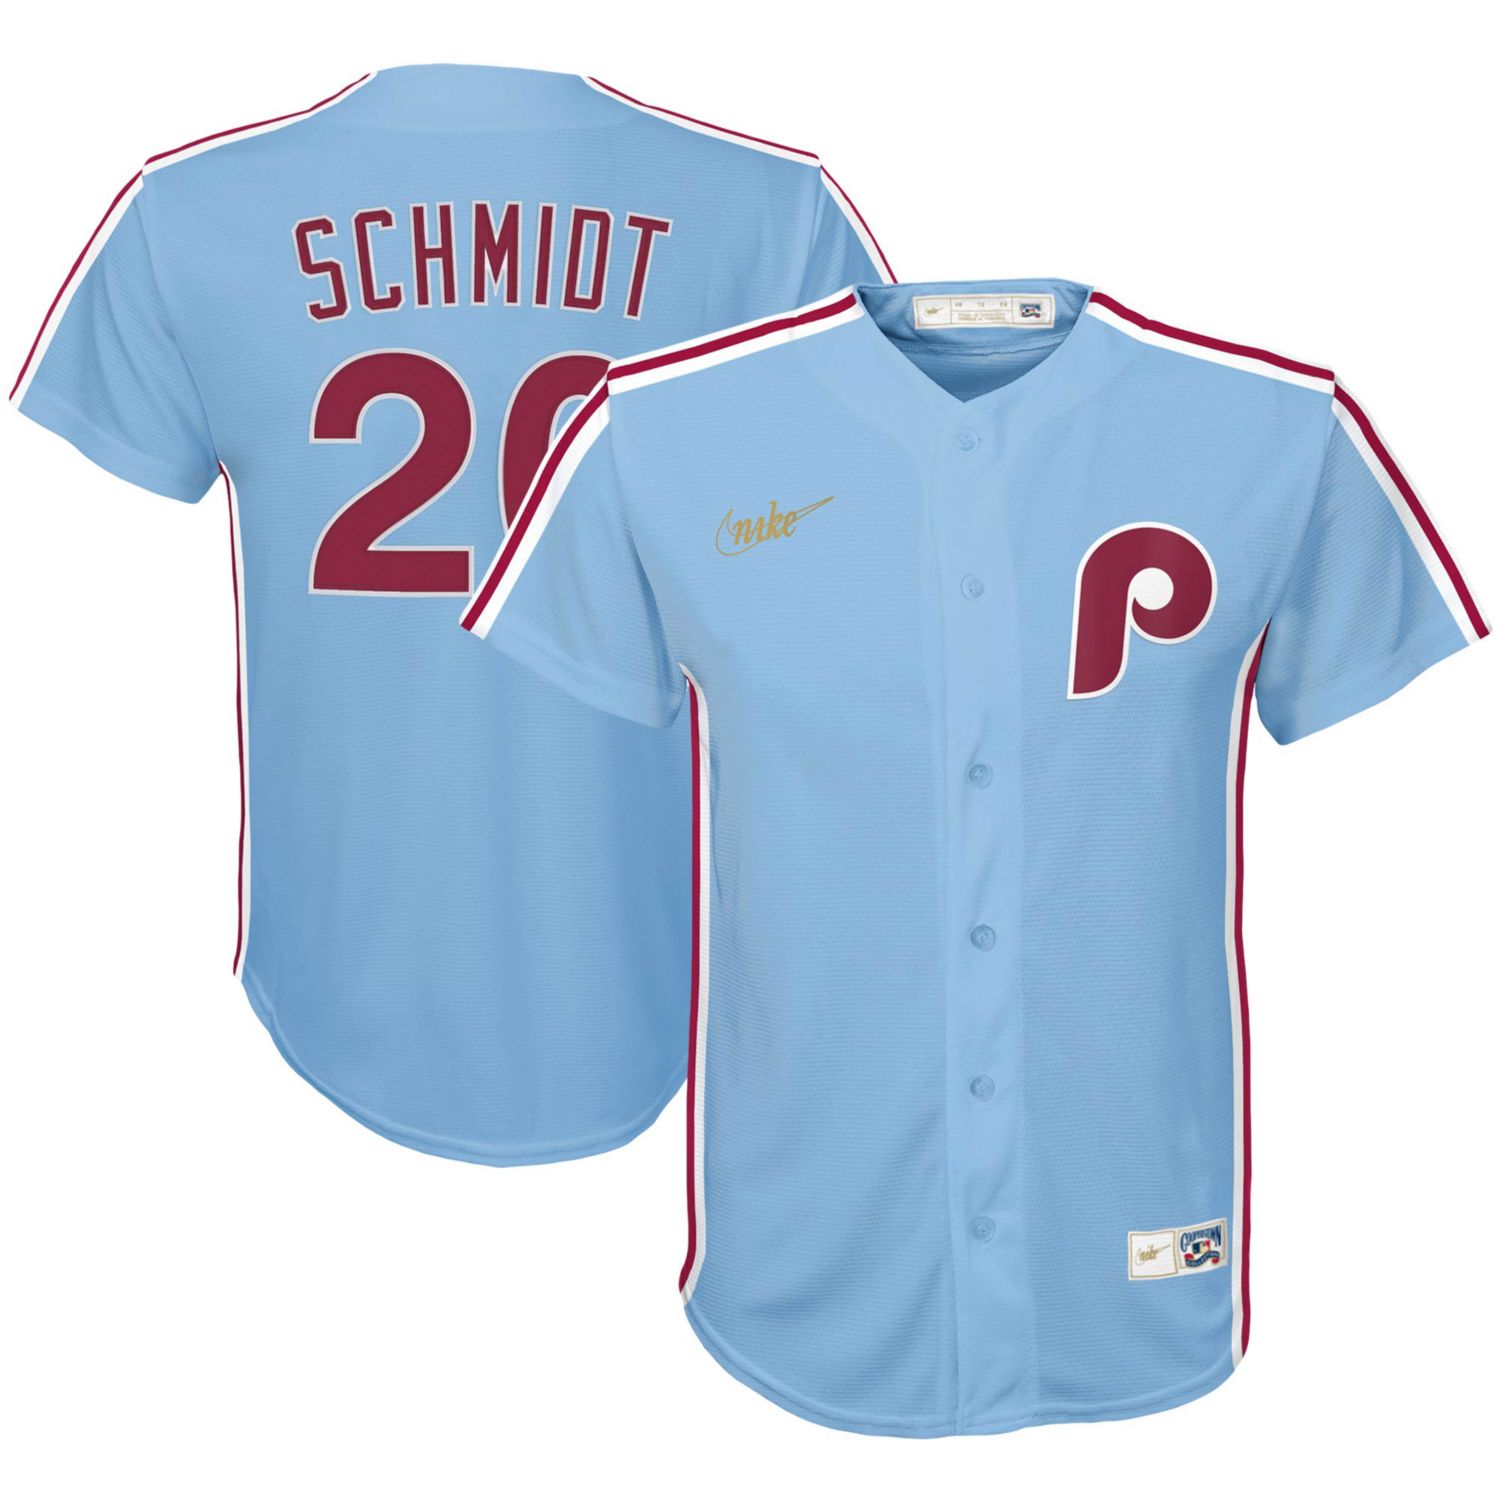 phillies jersey youth